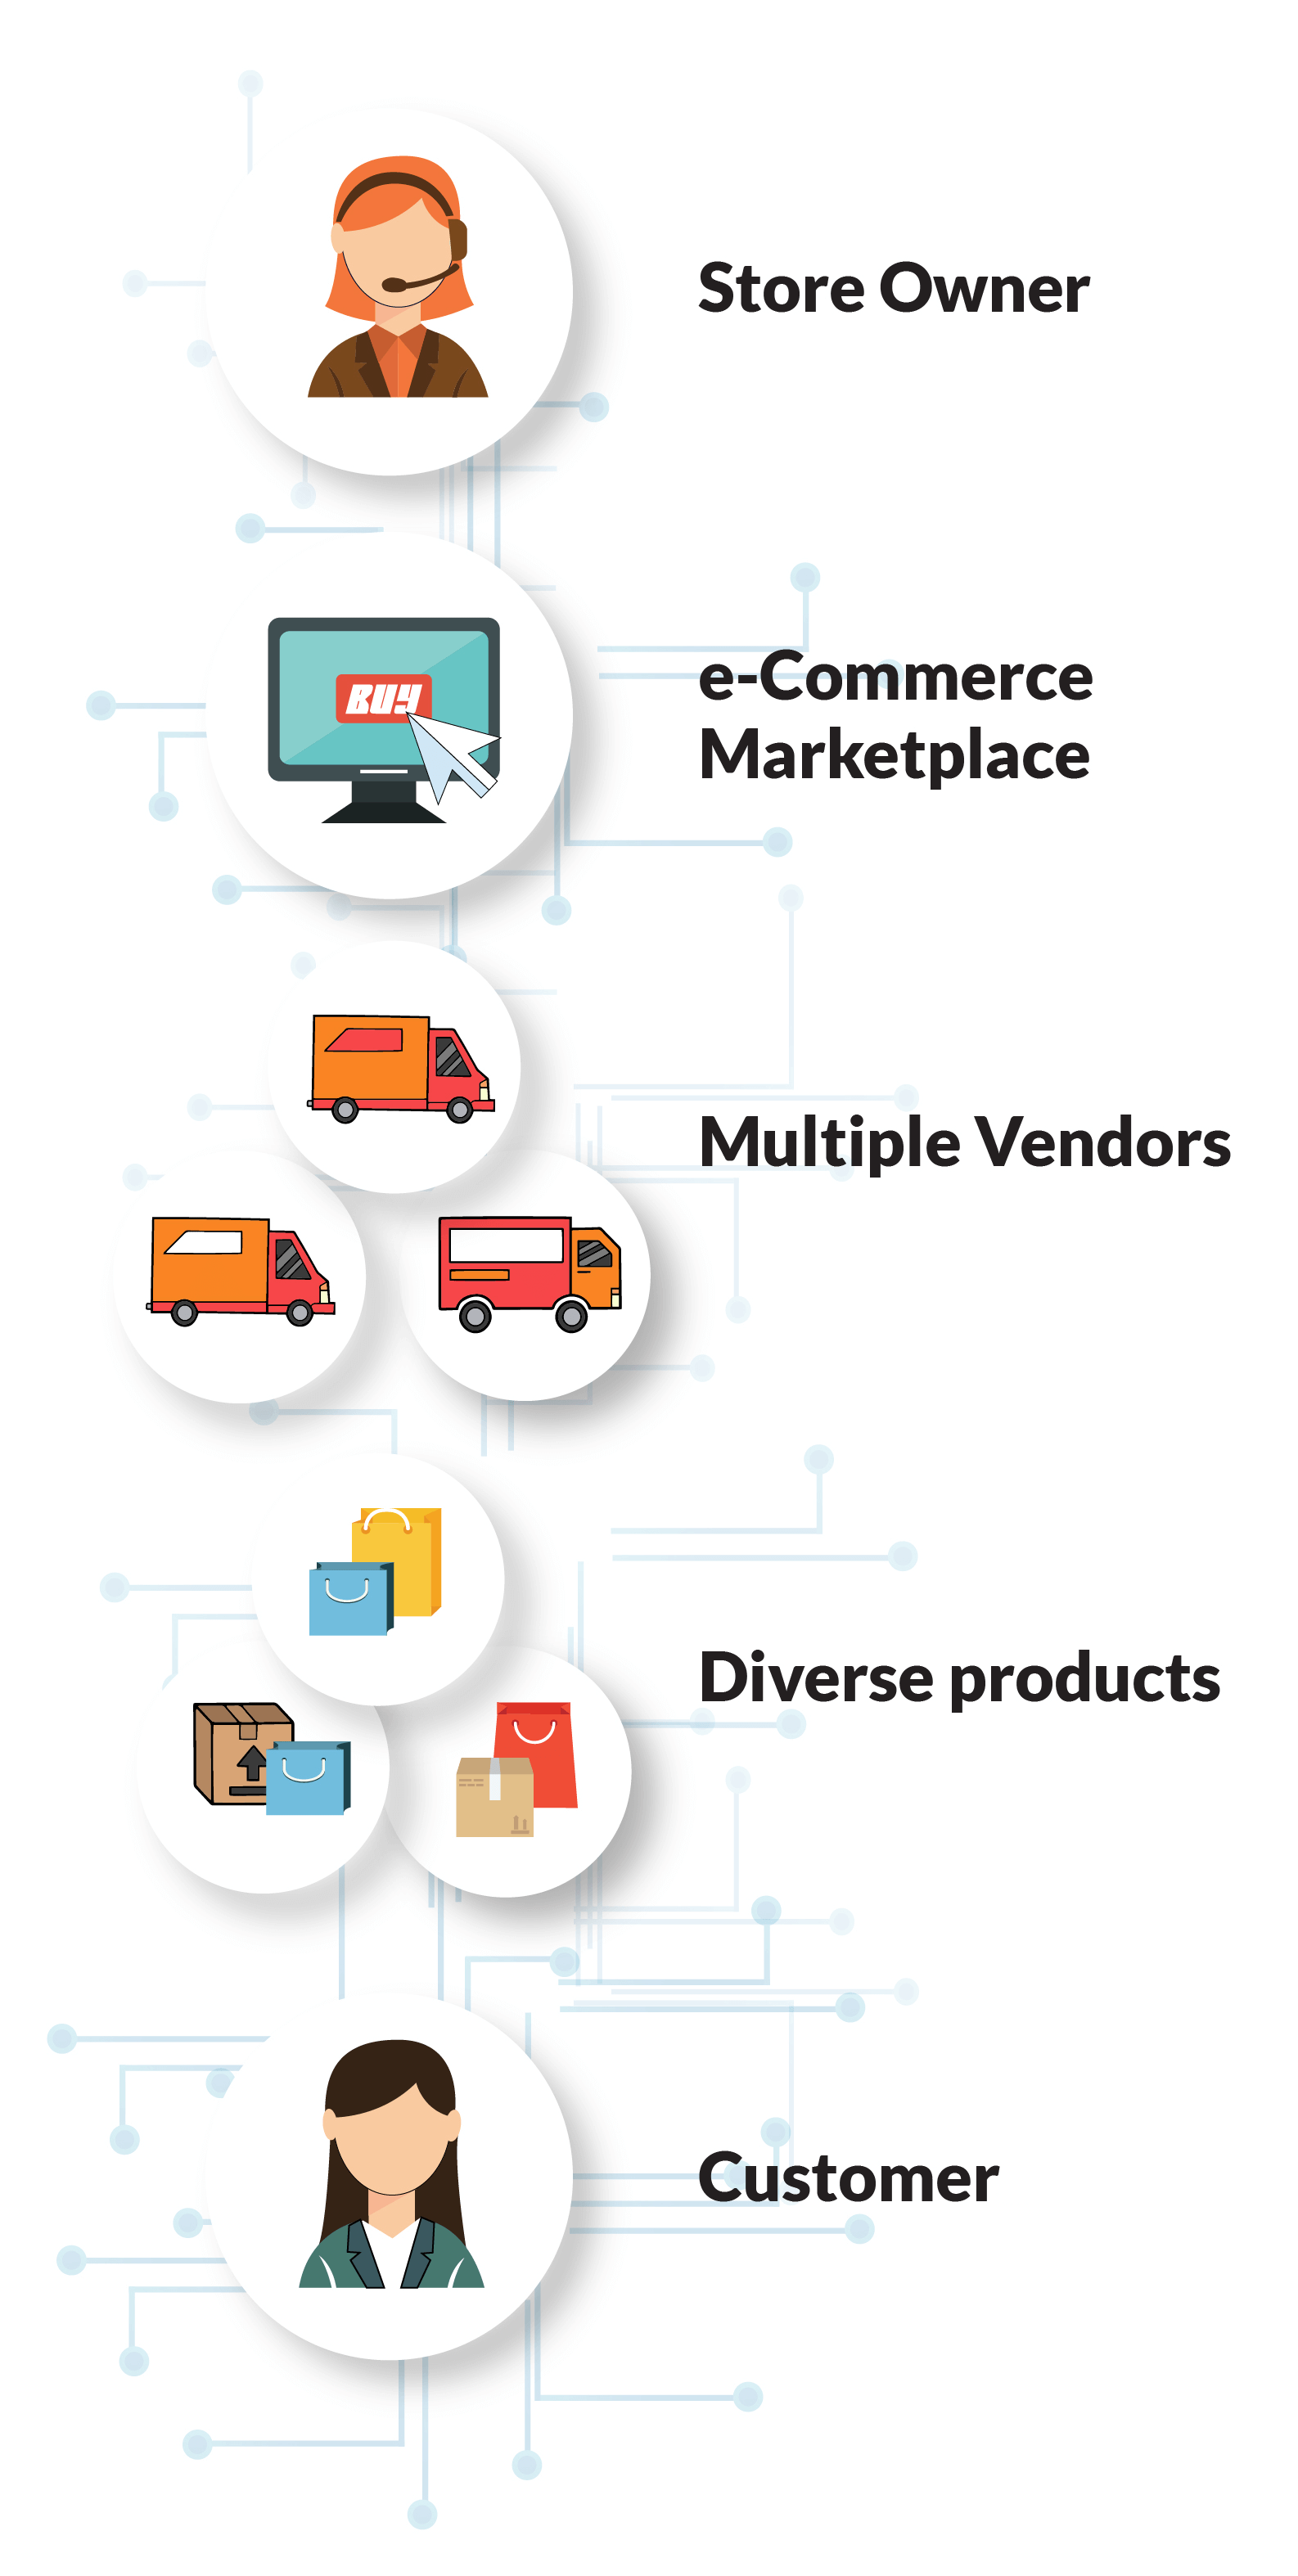 Store Owner. e-Commerce Marketplace. Multiple Vendors. Diverse Products. Customer.